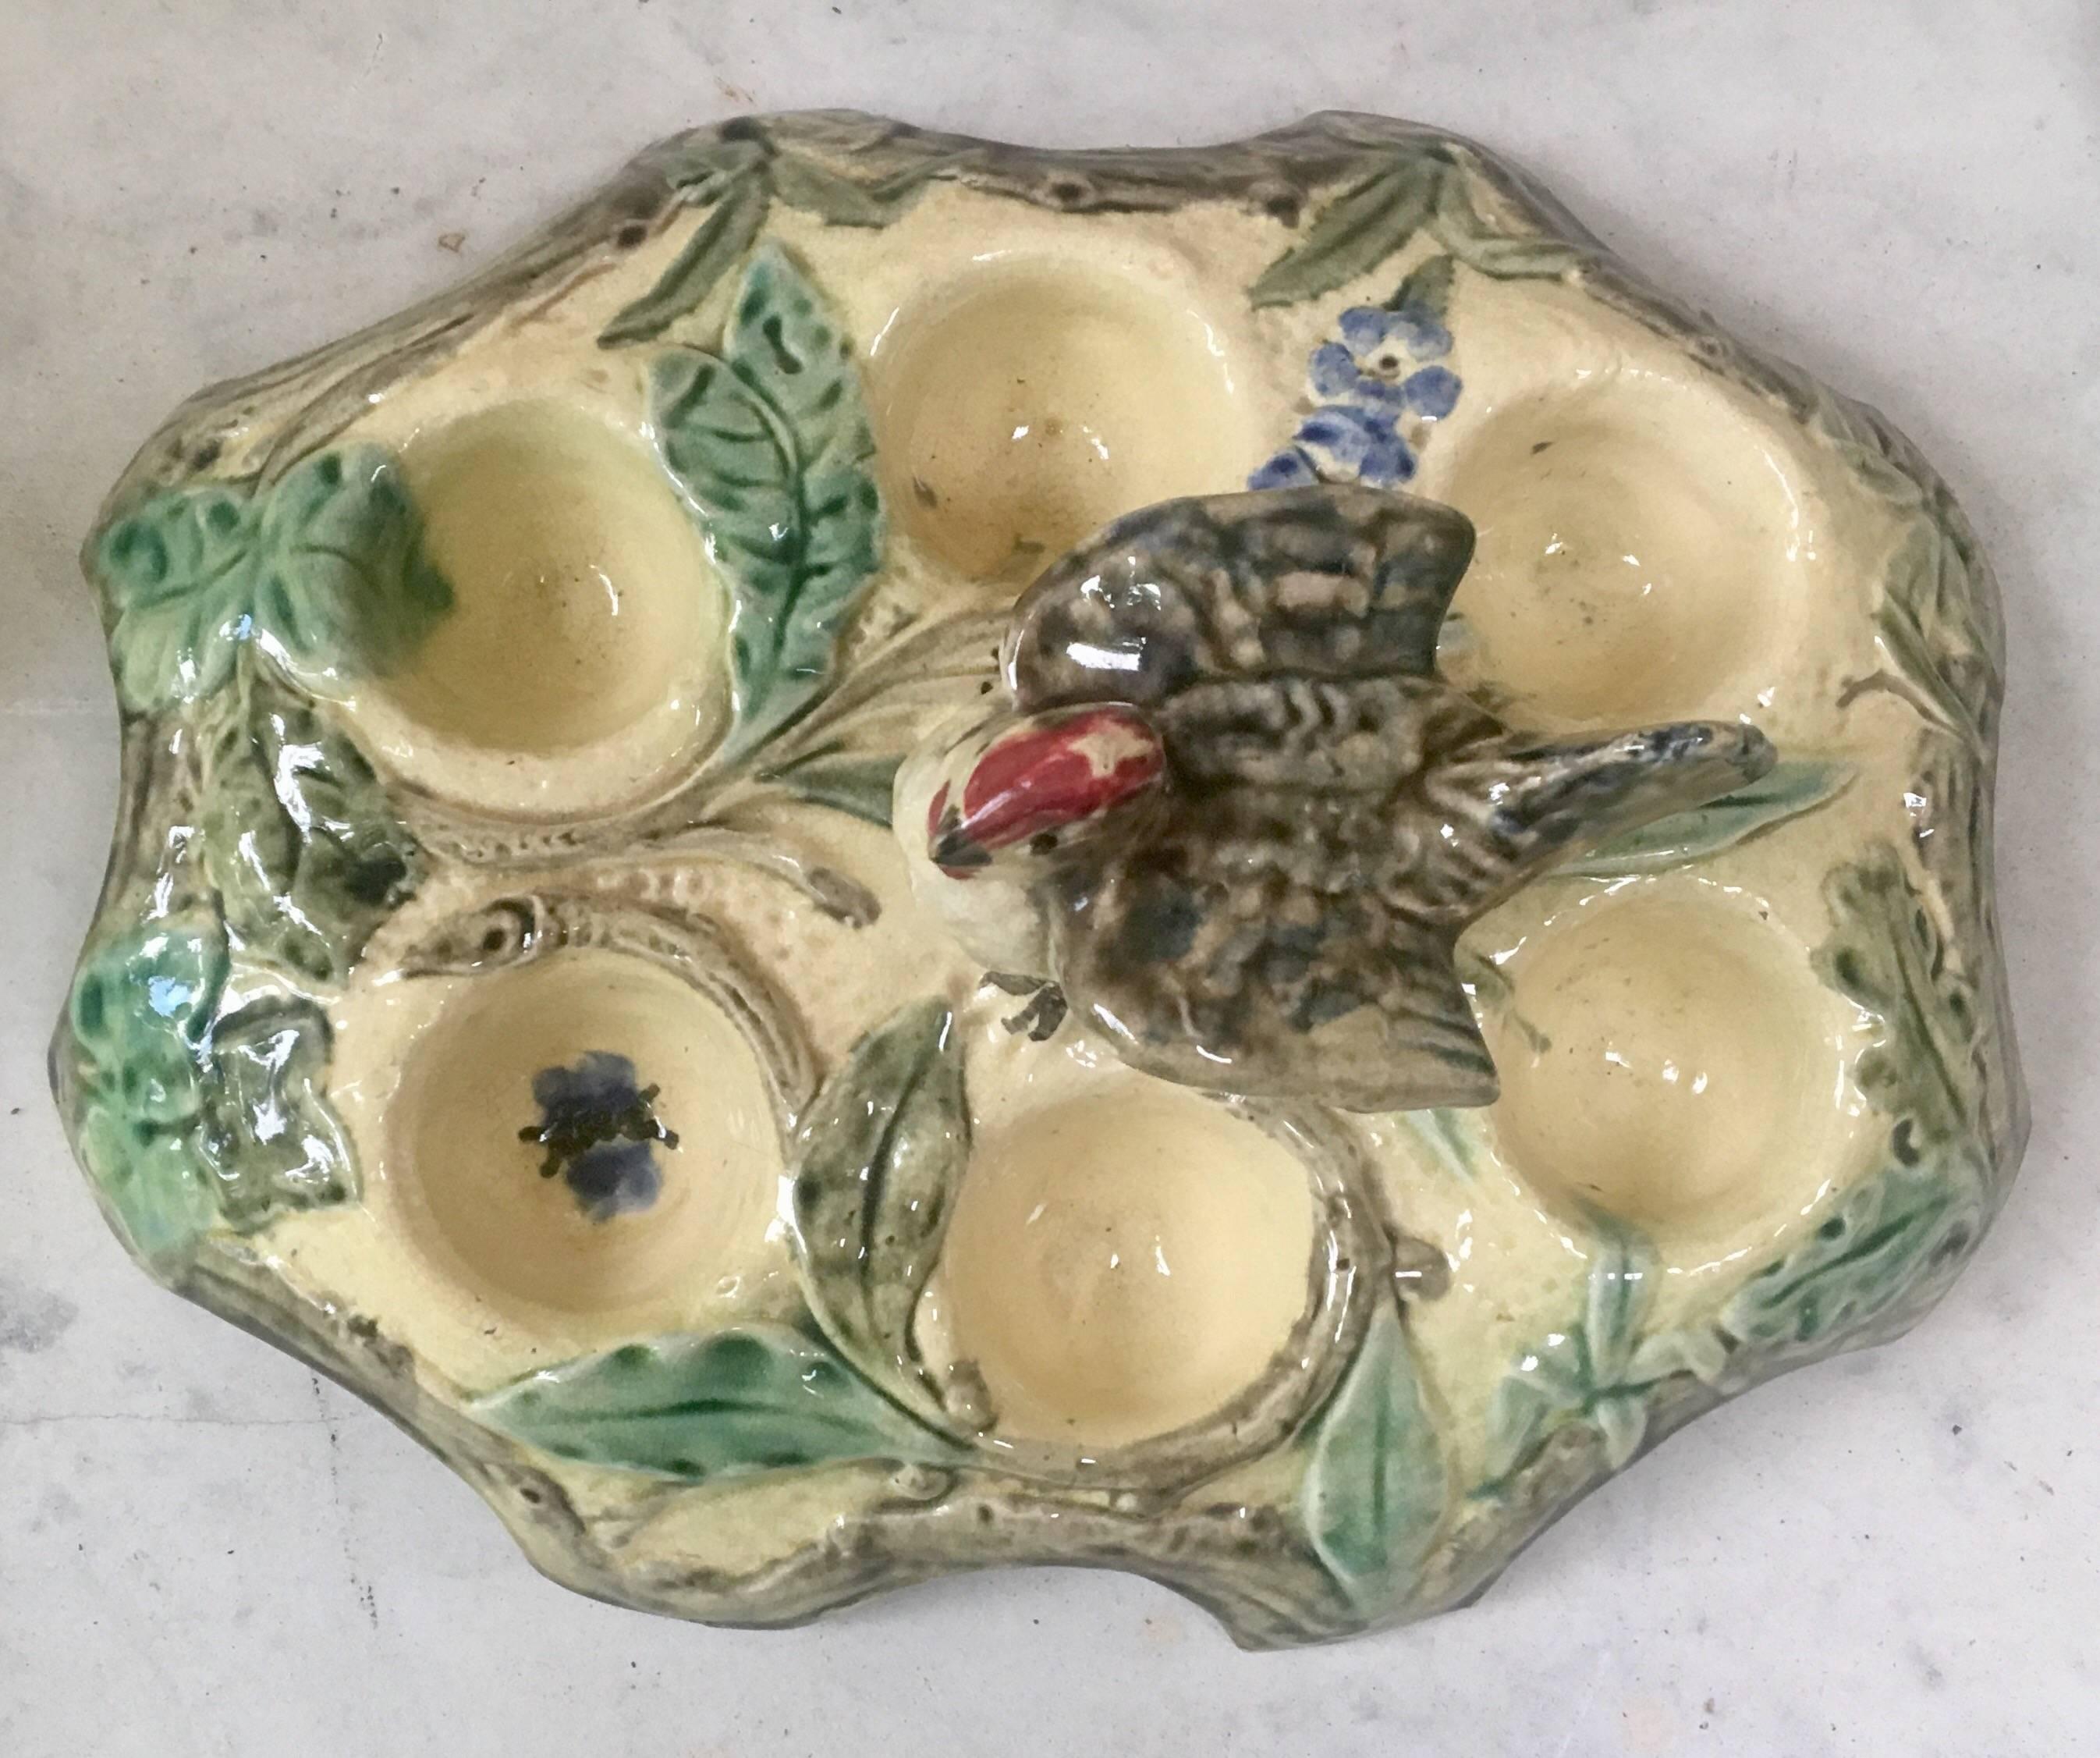 Belgium Majolica egg plate with bird handle for six eggs decorated with flowers, butterfly and leaves, circa 1880.